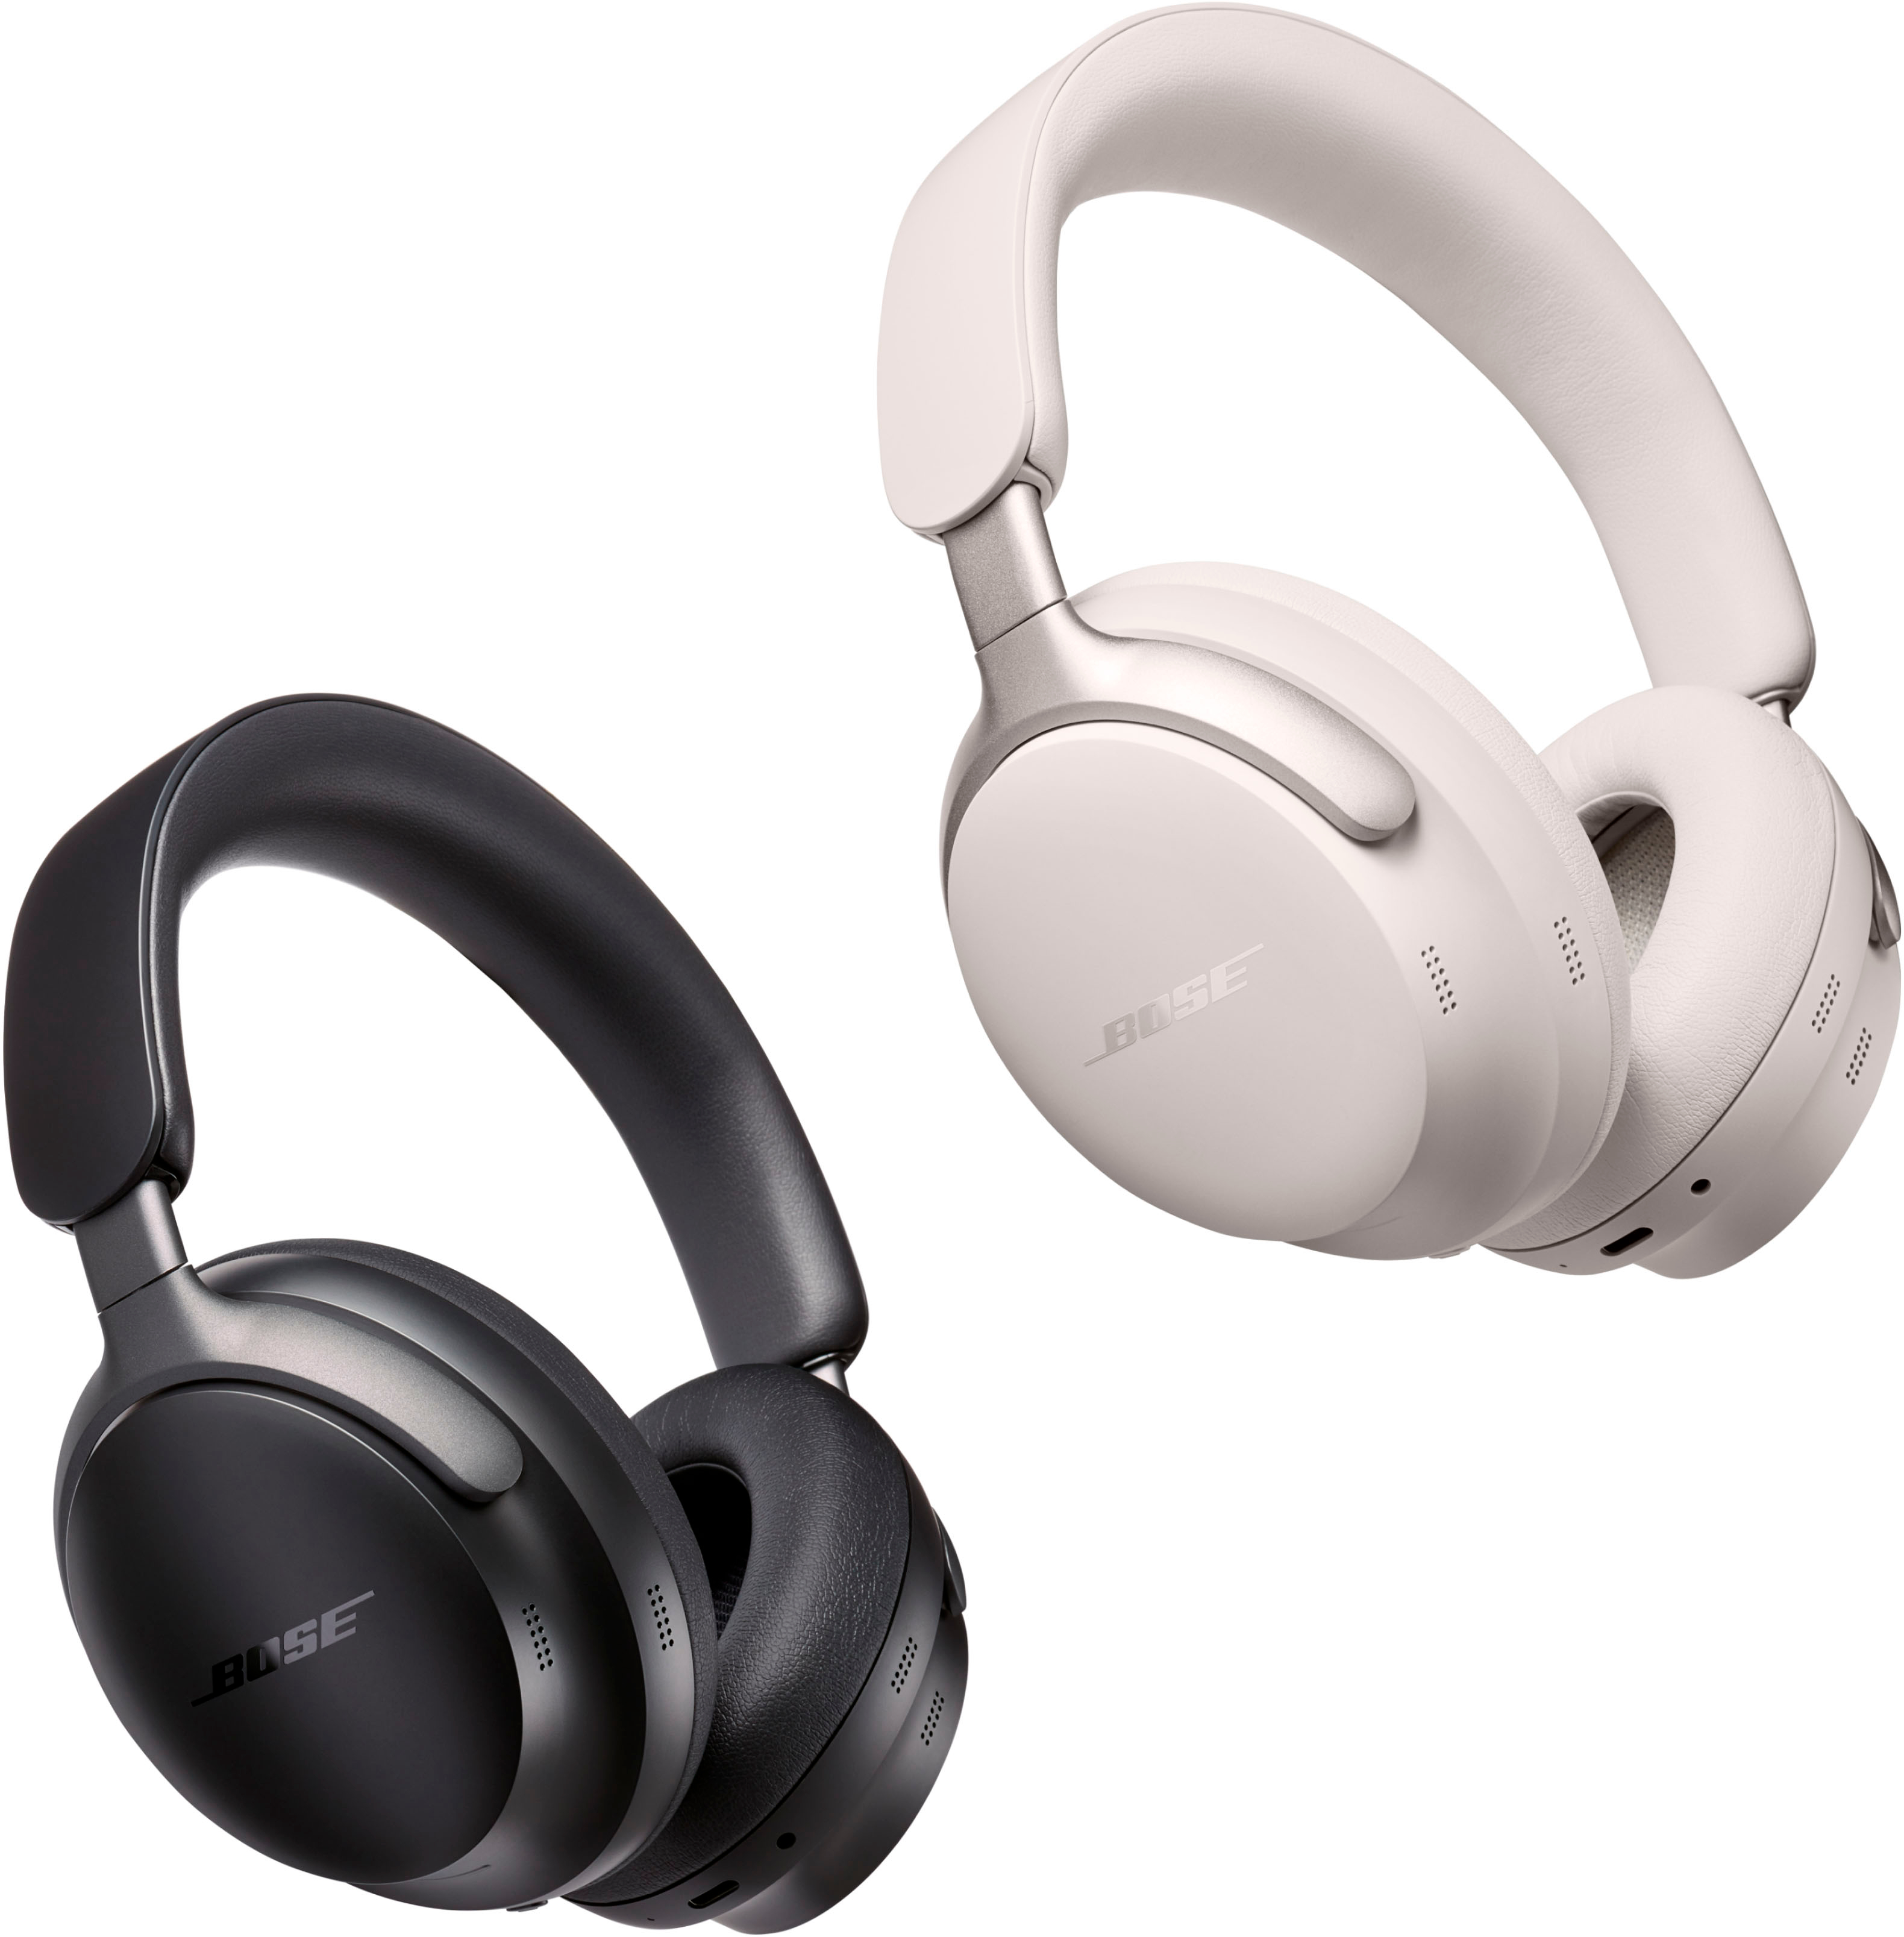 Bose QuietComfort Cancelling Smoke Buy - Over-the-Ear White Wireless Headphones 880066-0200 Best Noise Ultra